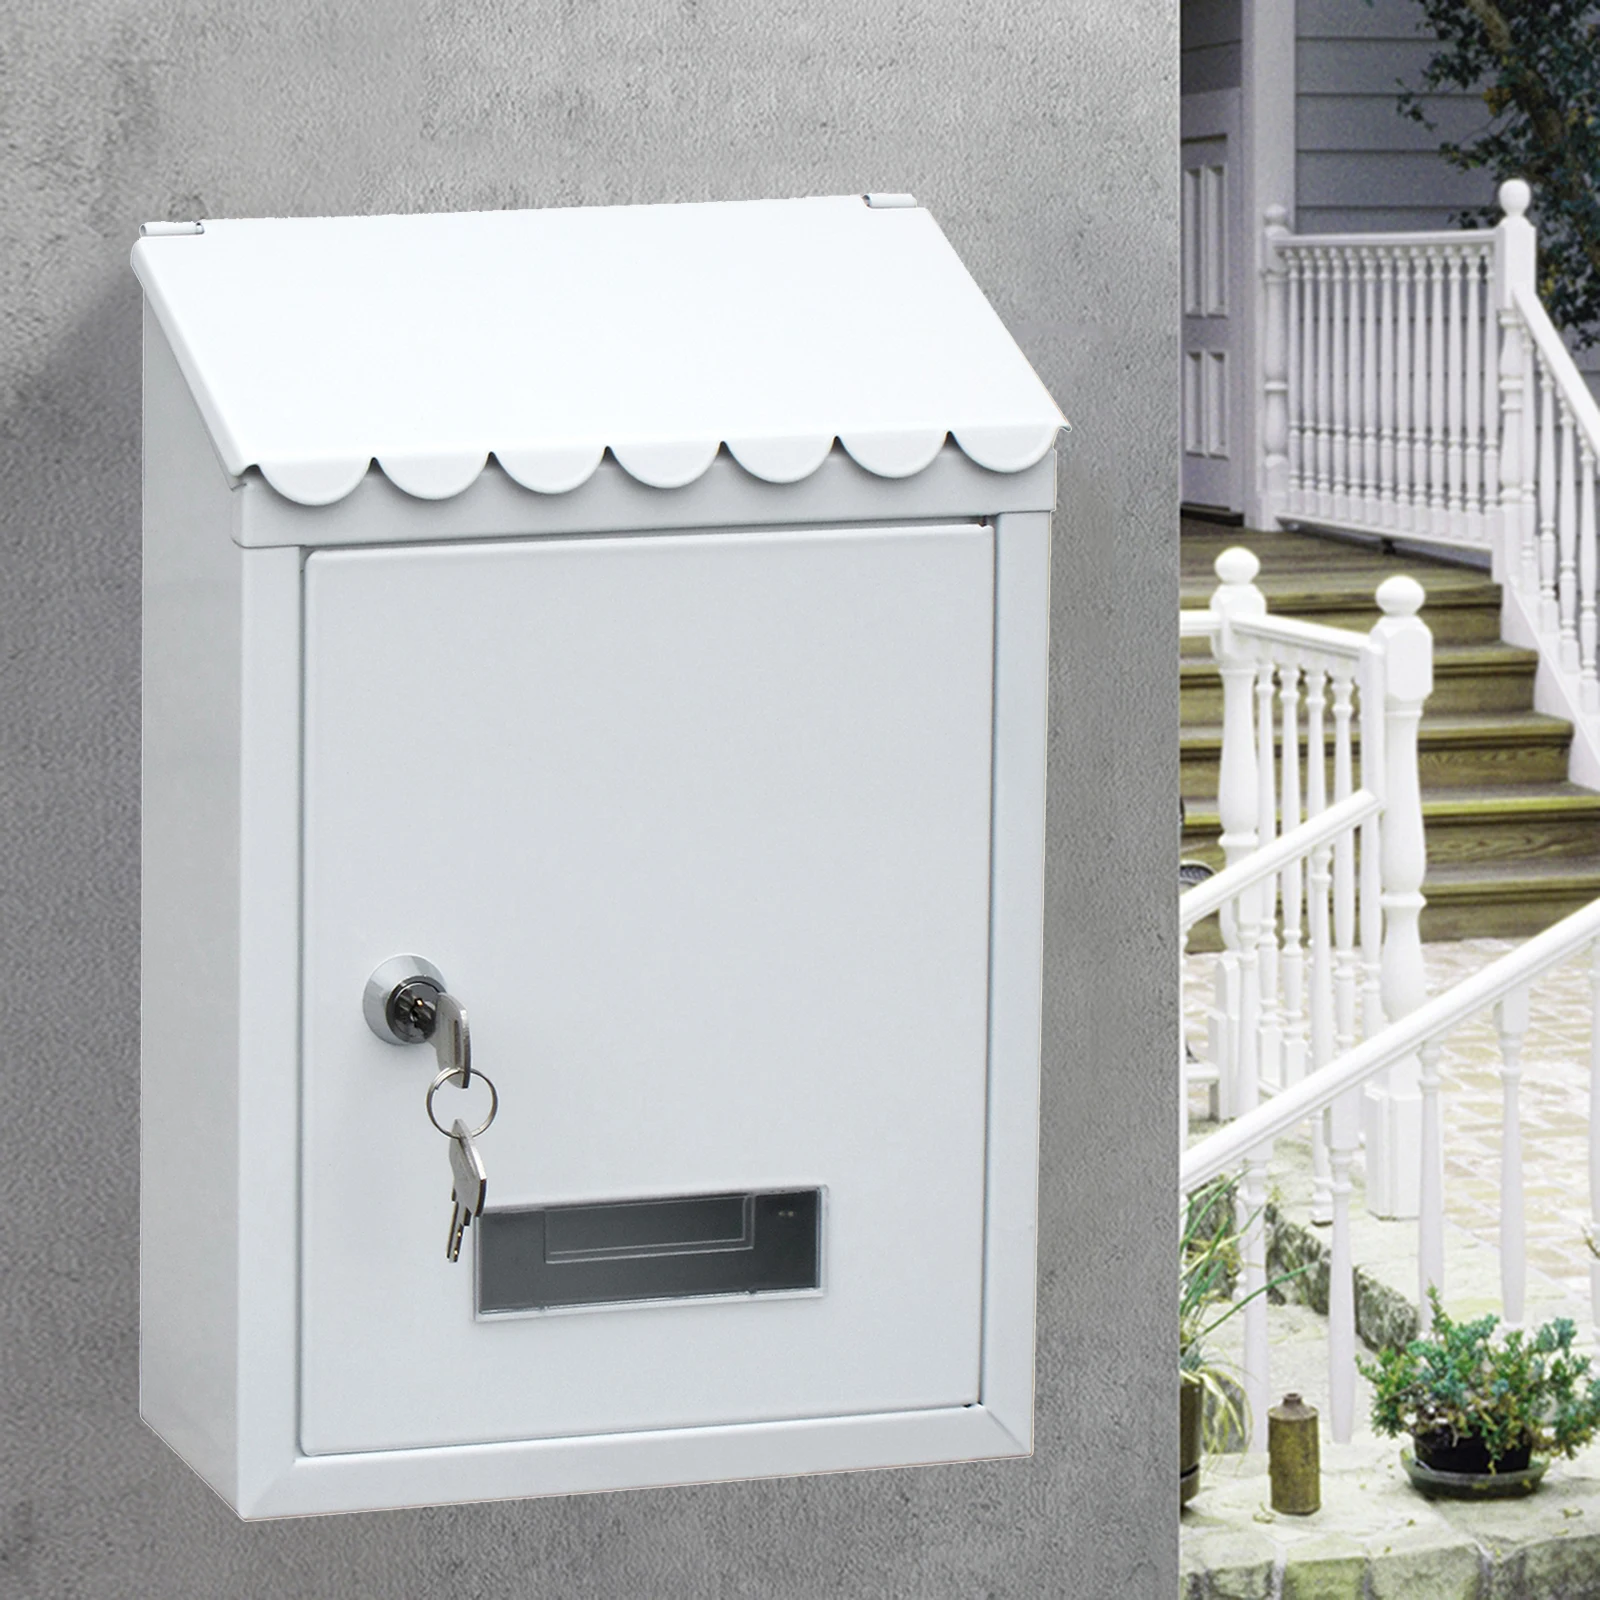 Rust-proof Mailbox Letterbox, Solid Rainproof Wall Mounted Secure Lockable Mail Box for Newspaper, Magazines, Letters Receiving